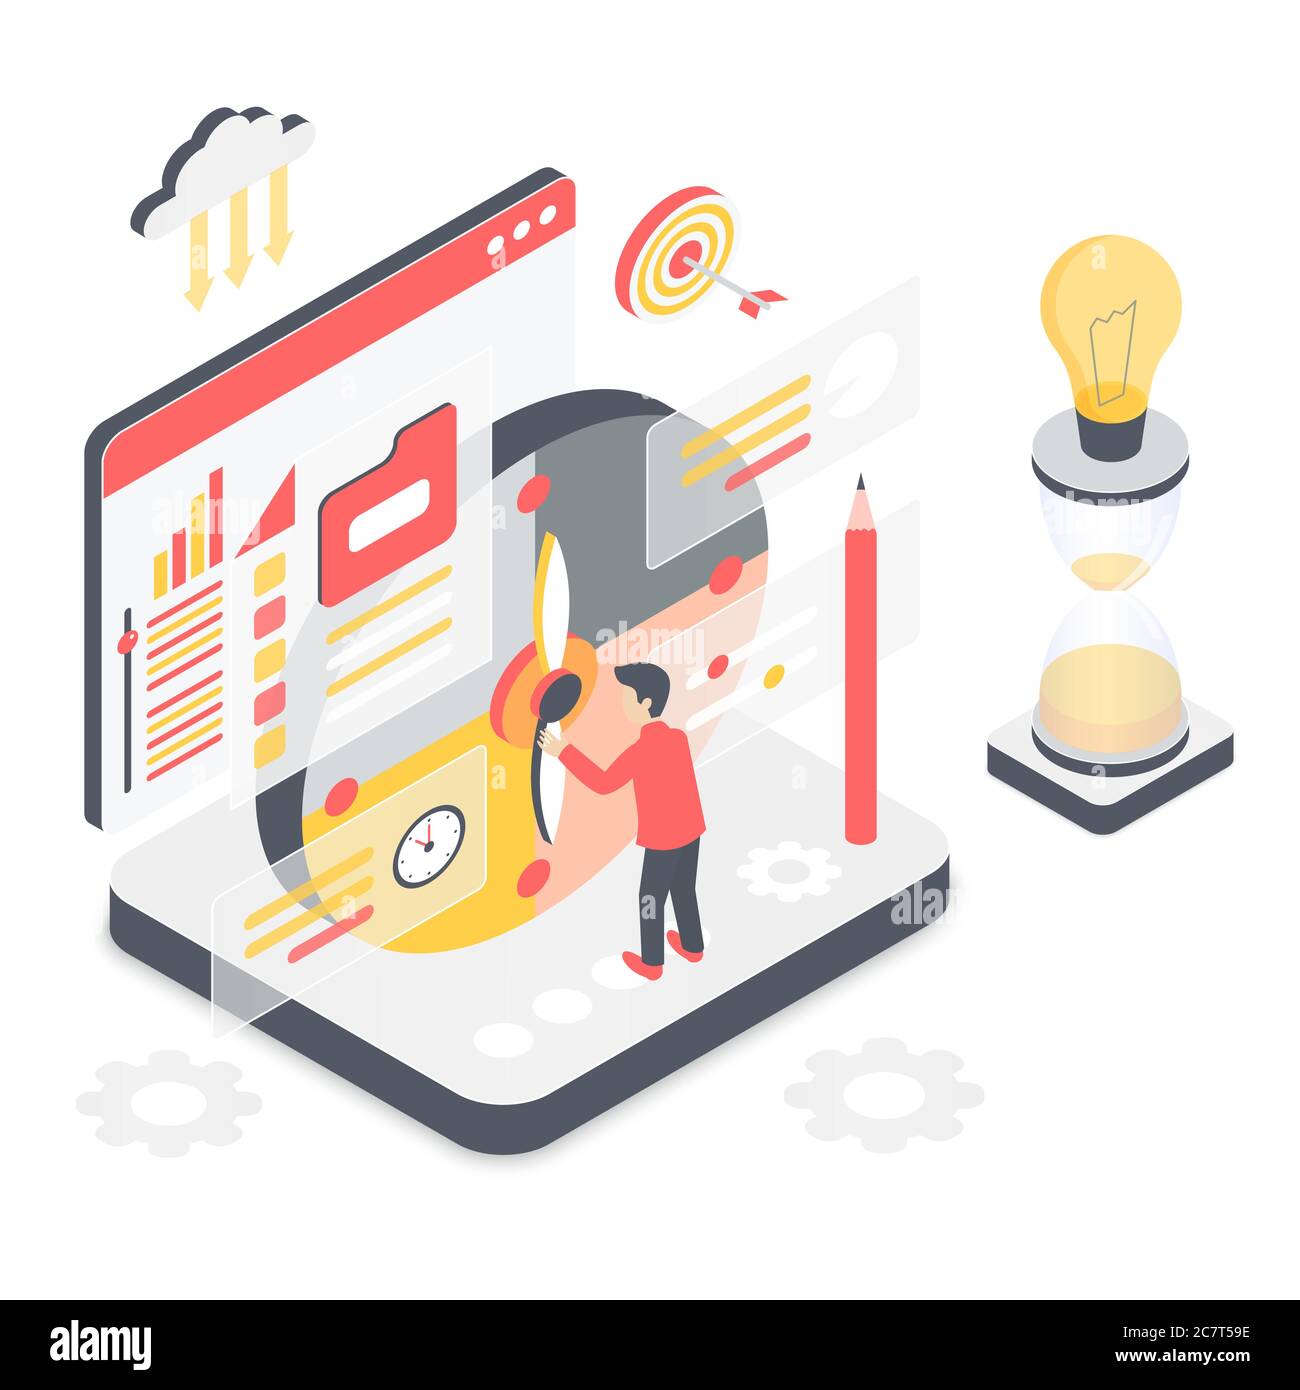 Effective time management isometric vector illustration. Planning projects to meet deadline. Productivity and multitasking. Timetable indicator. Virtual platform cartoon conceptual design element Stock Vector